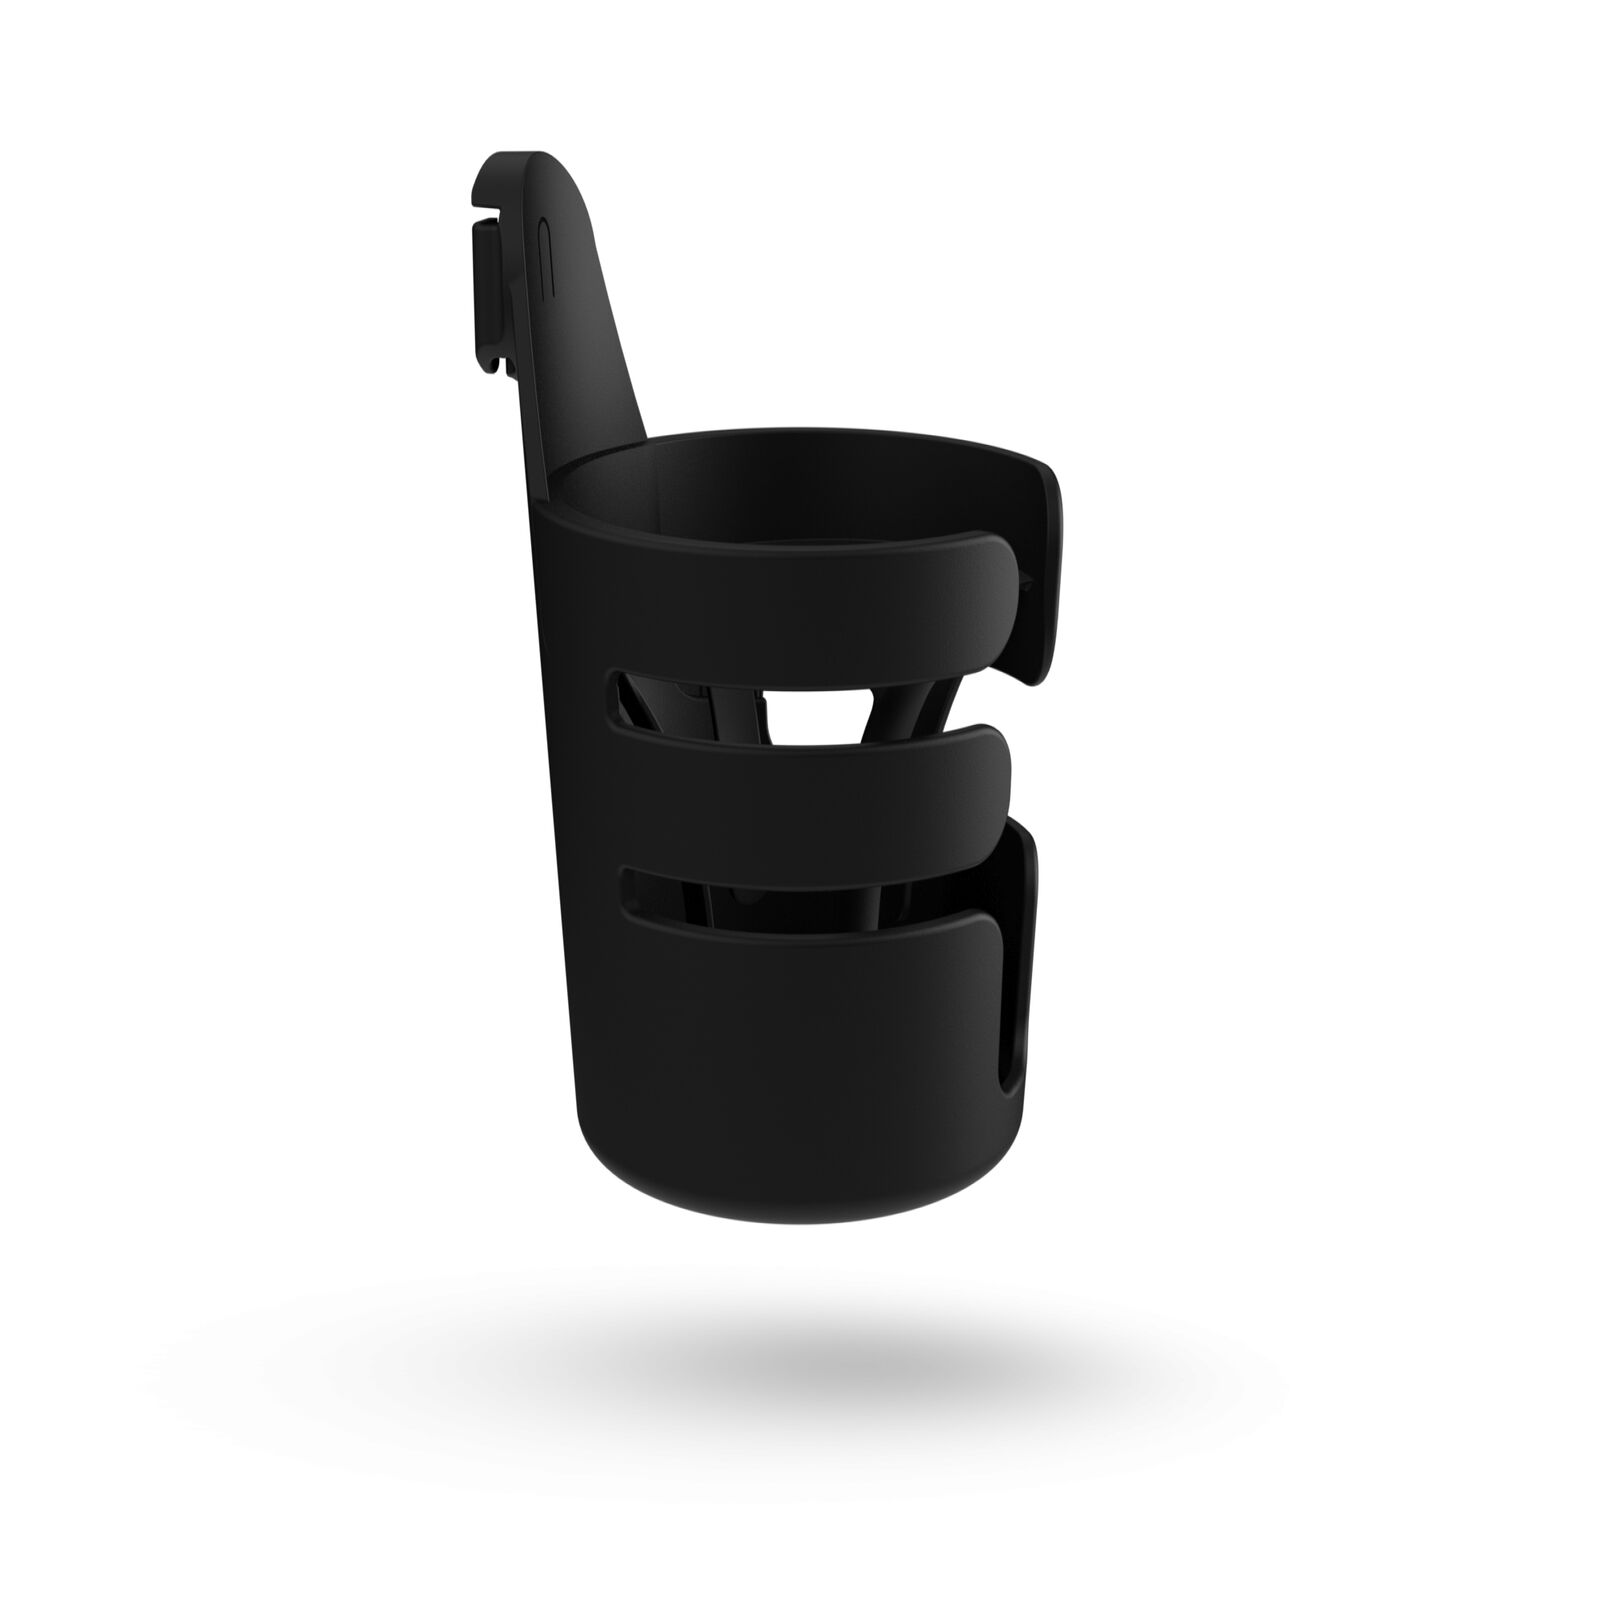 Bugaboo cupholder - View 1